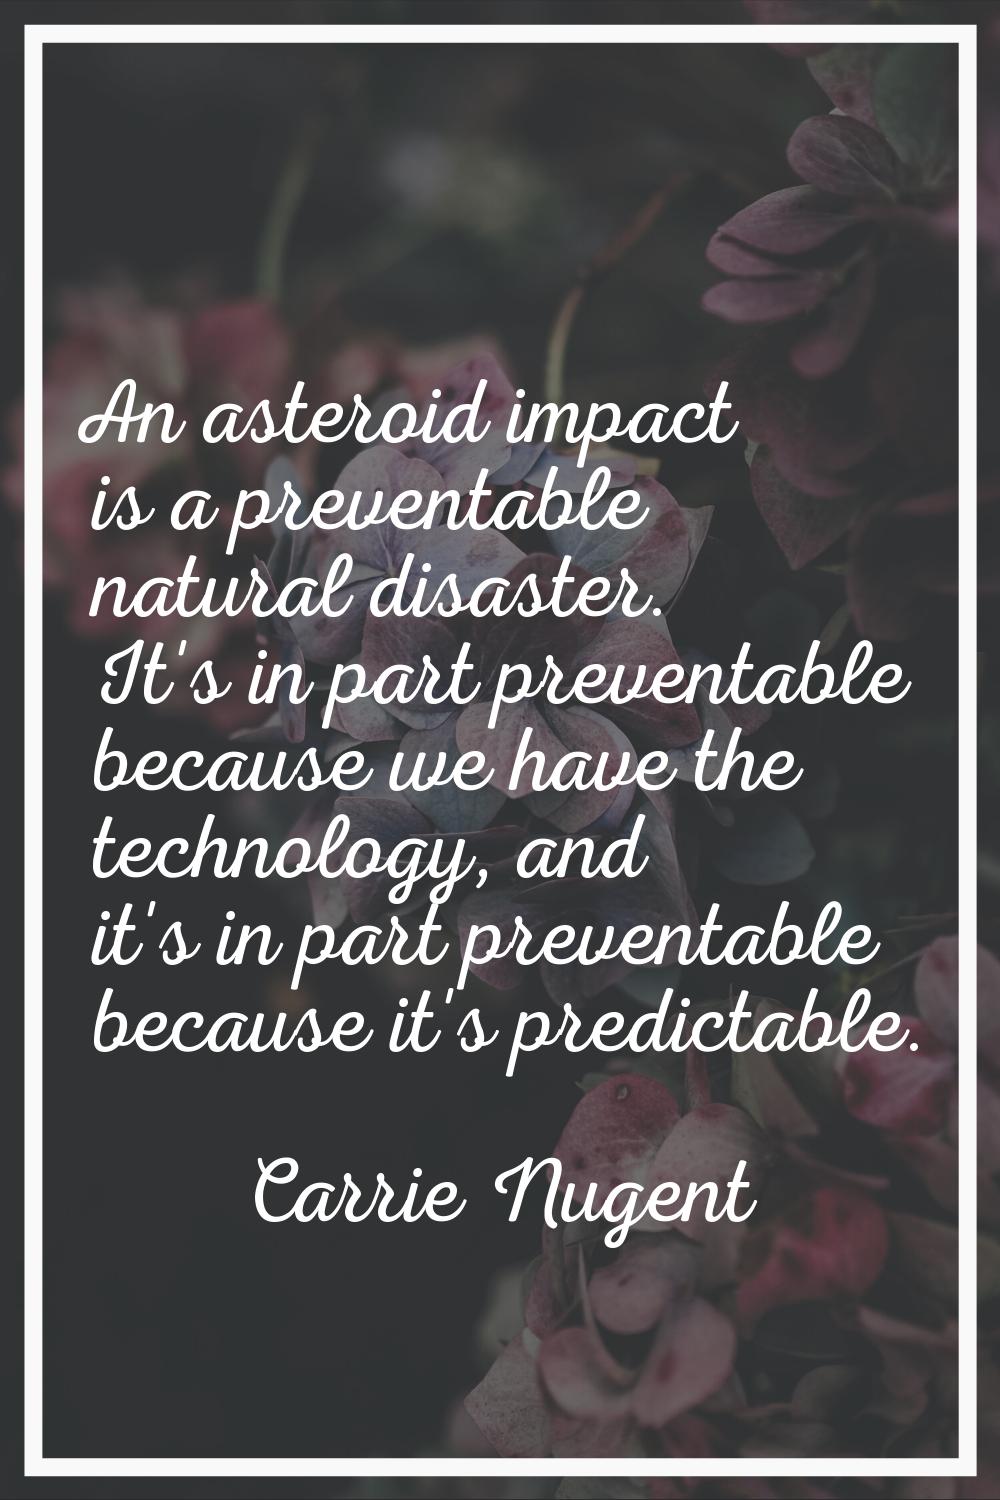 An asteroid impact is a preventable natural disaster. It's in part preventable because we have the 